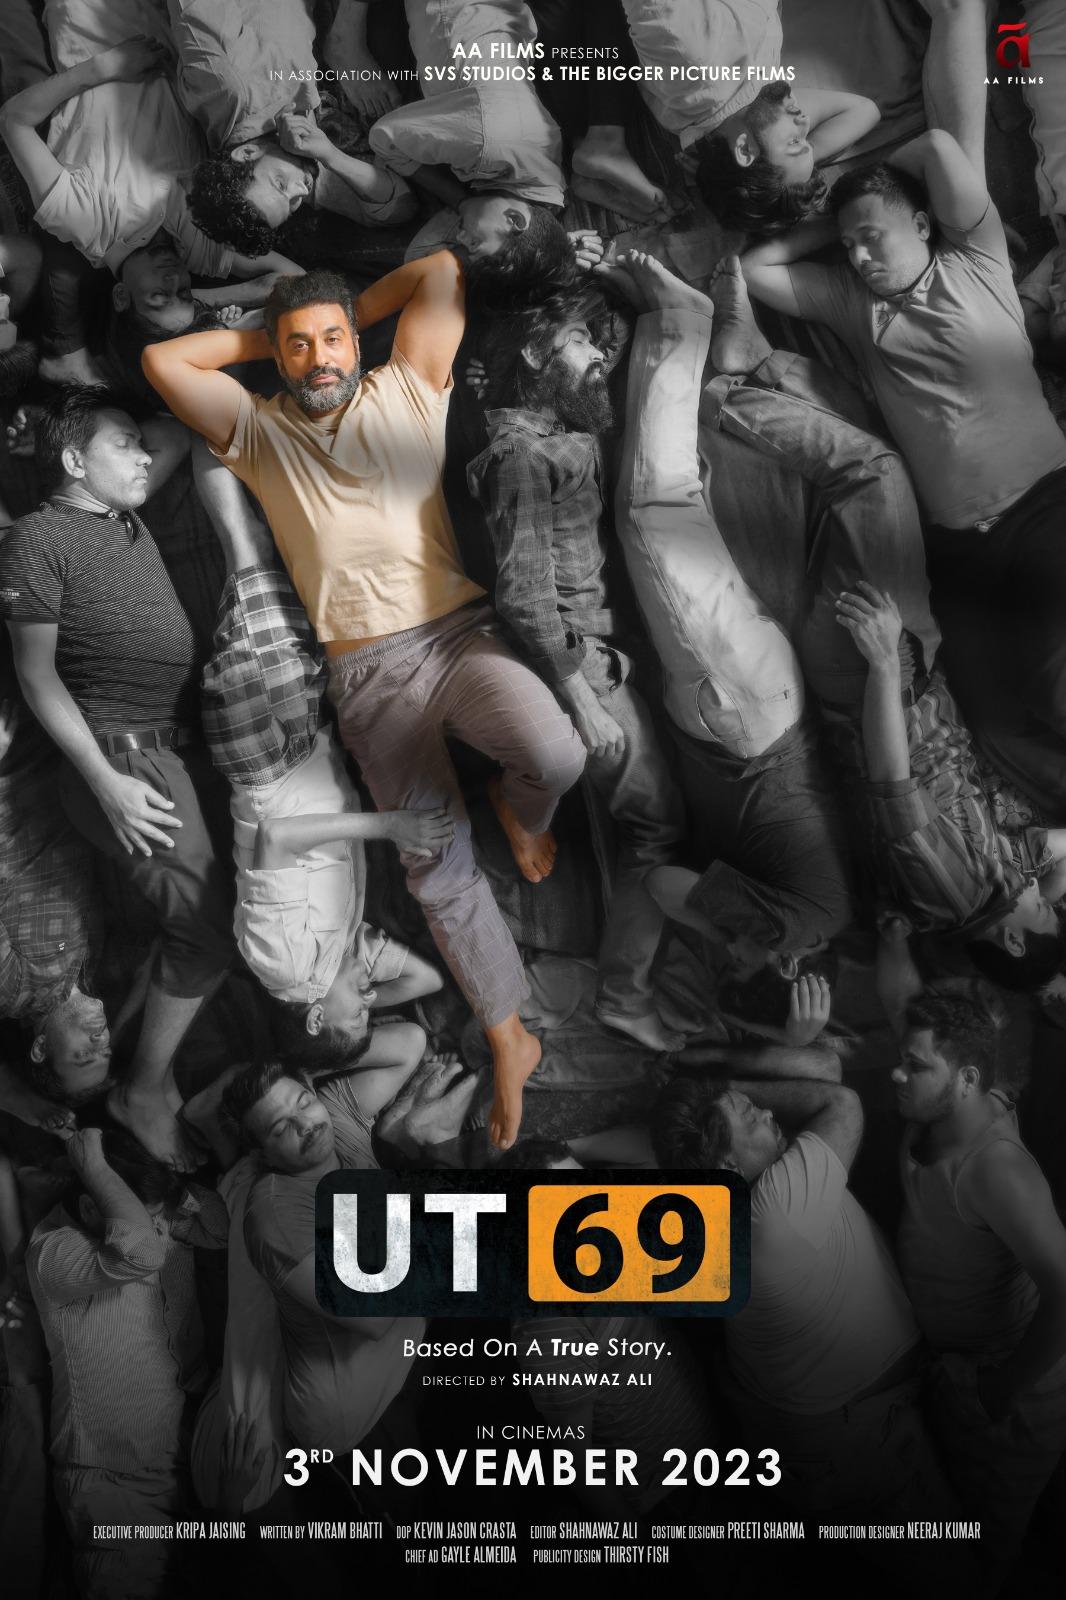 UT69 - November 3UT69, a film hitting the silver screen, is intricately woven around the concept of being 'based on a true story.' It delves into Kundra's personal journey during his stint at Mumbai's Arthur Road Jail. Throughout his time there, he finds himself repeatedly questioned about his famous movie star spouse, Shilpa Shetty, and must adapt to a life devoid of even a basic toothbrush. 